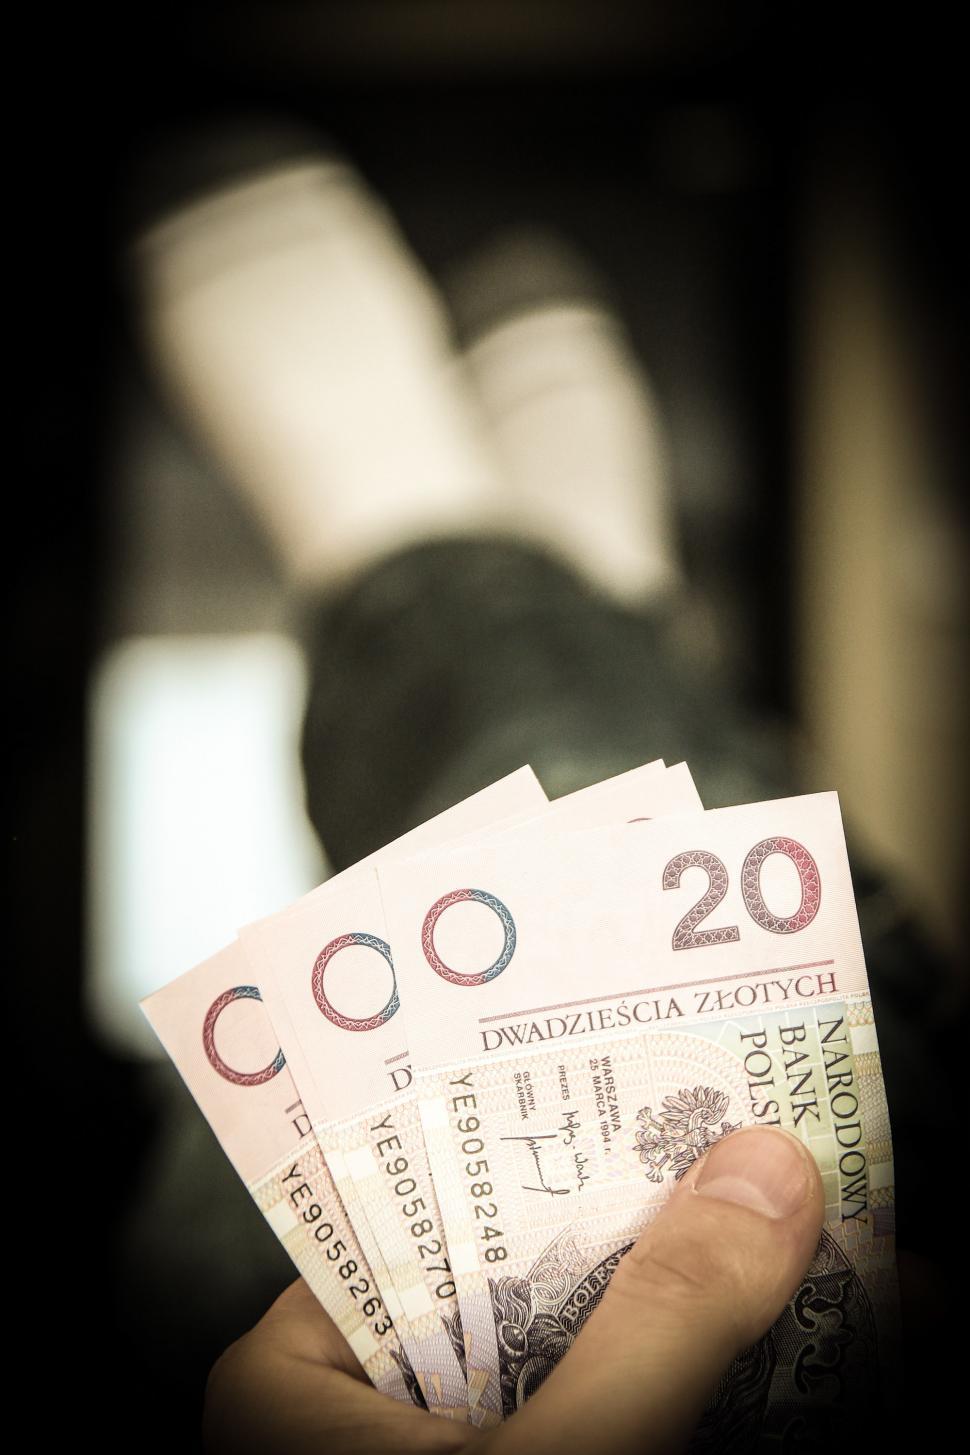 Free Image of Person Holding a Bunch of Money in Hand 